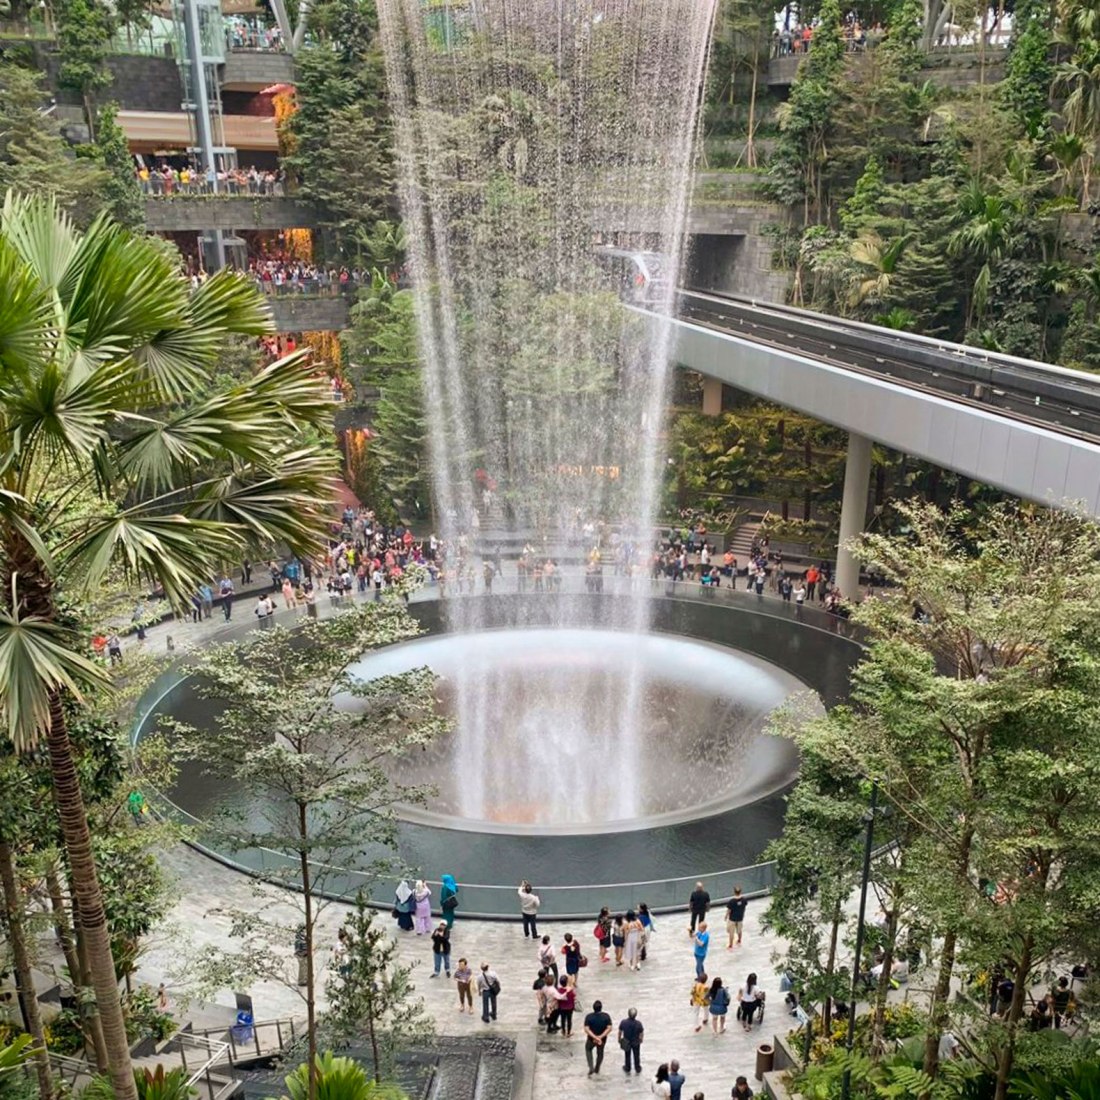 The world's tallest indoor waterfall at Jewel Changi Airport by Safdie Architects. Photography is courtesy of Jewel Changi Airport